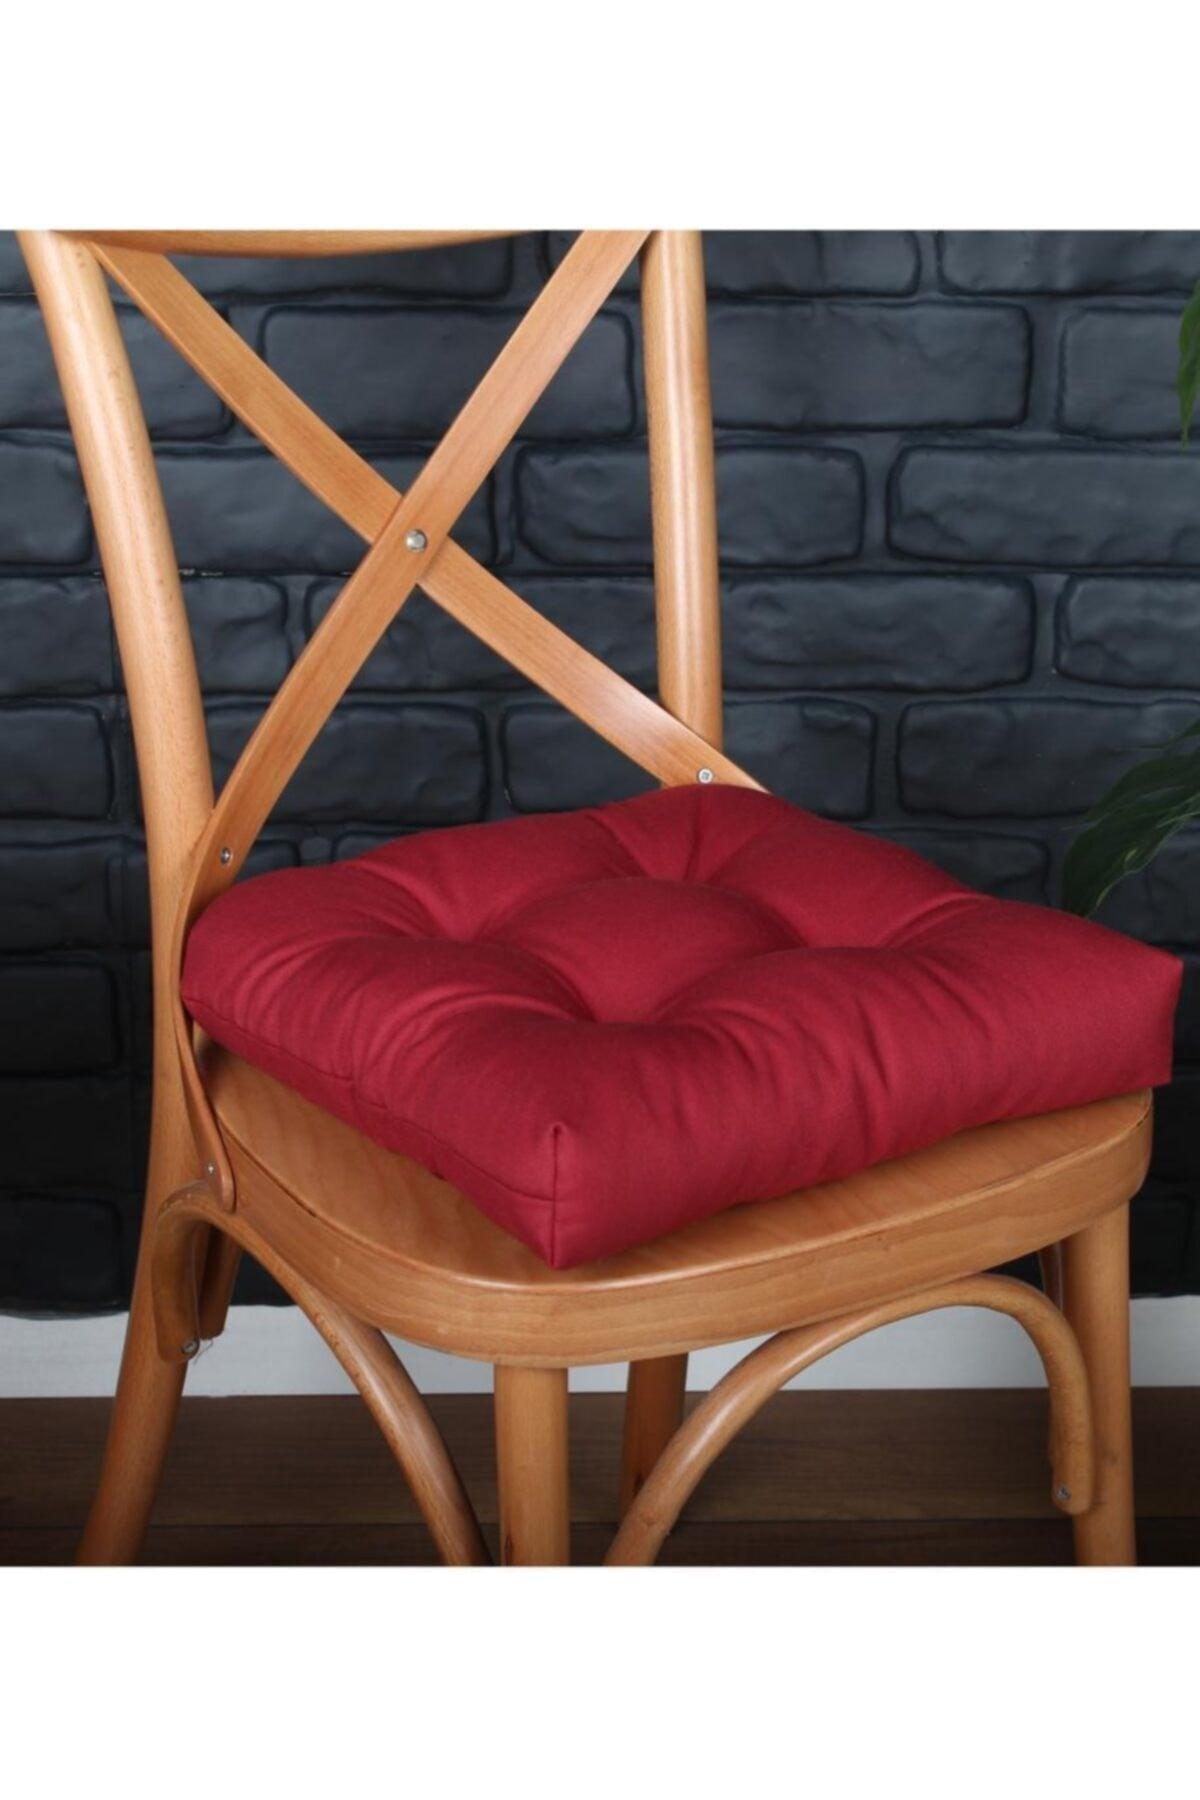 Lux Pofidik Claret Red Chair Cushion Special Stitched Laced 40x40cm - Swordslife